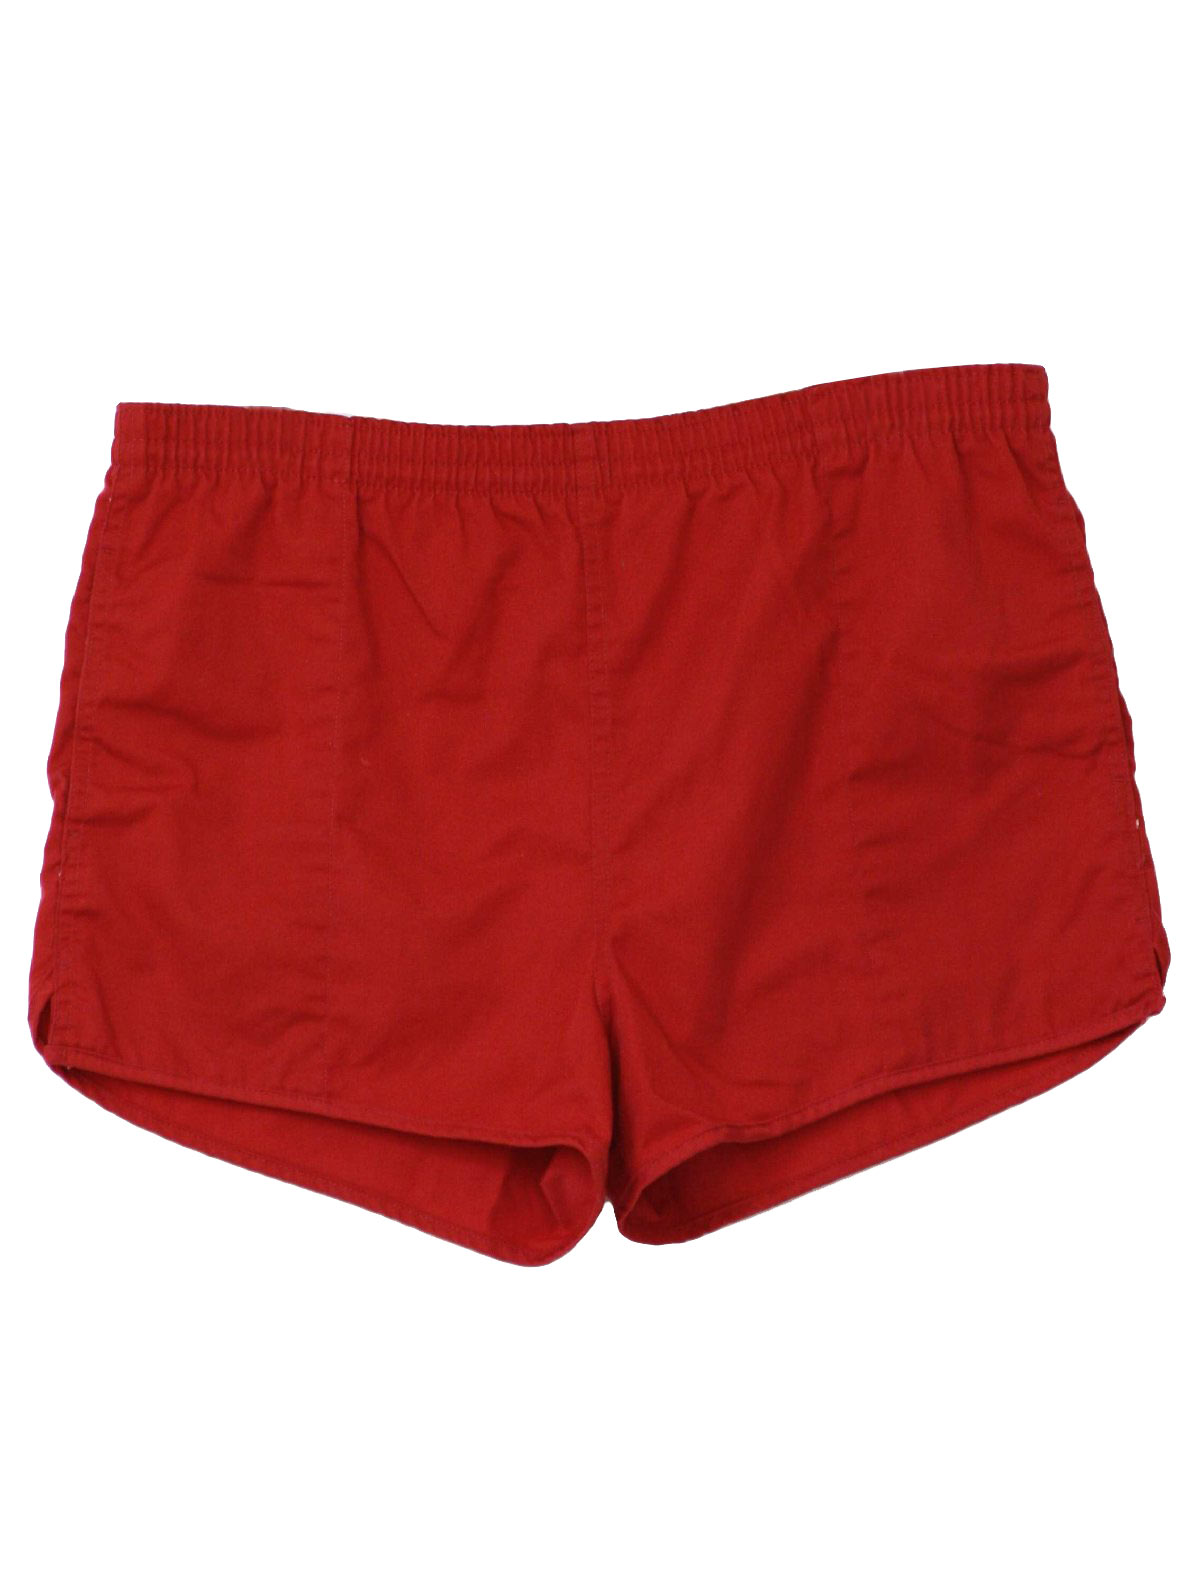 Eighties lands End Shorts: 80s -lands End- Mens red polyester and ...